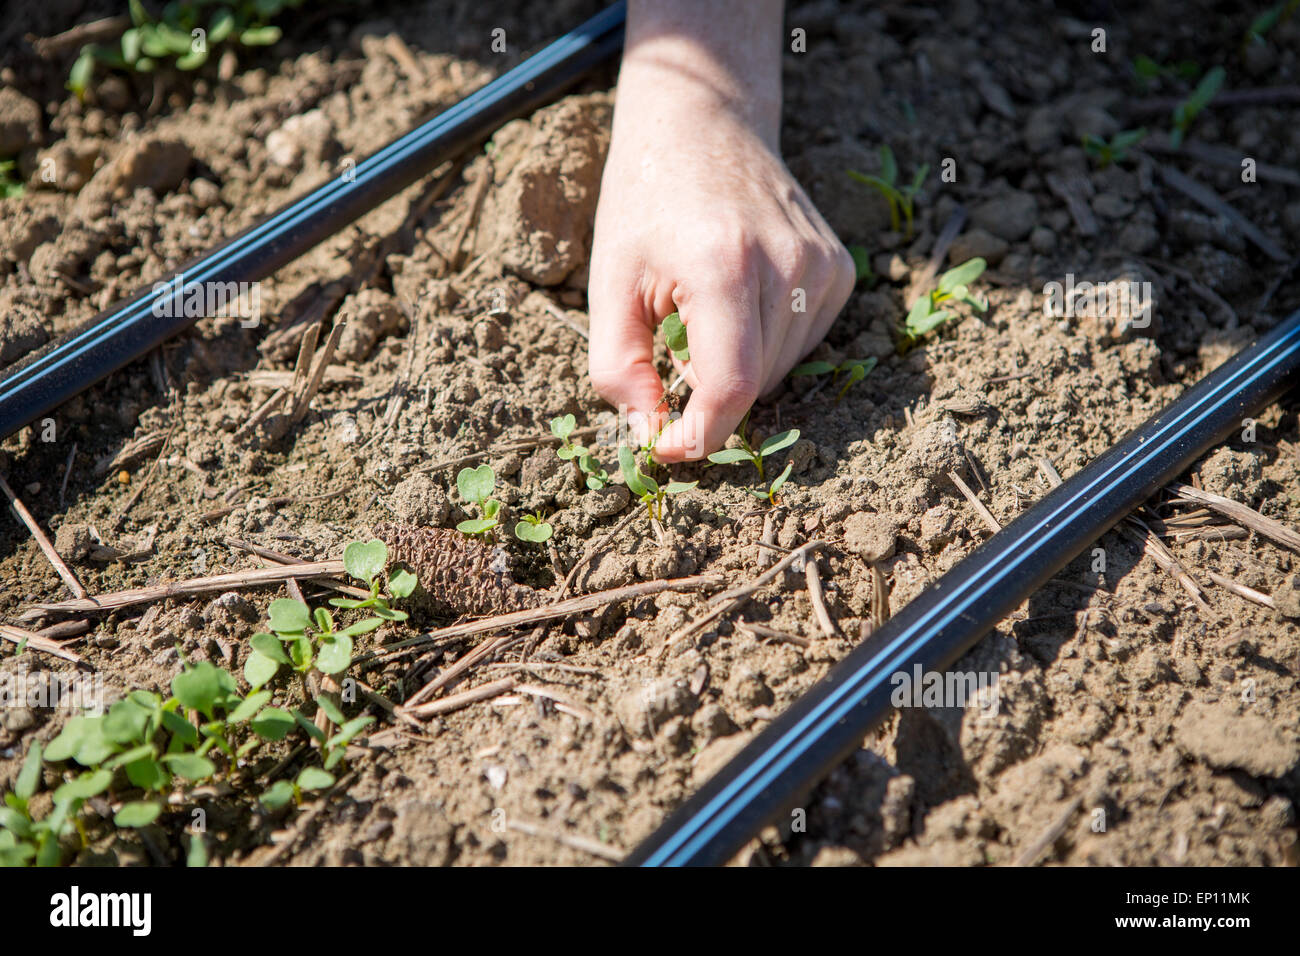 Hands picking small green plant out of soil. Stock Photo